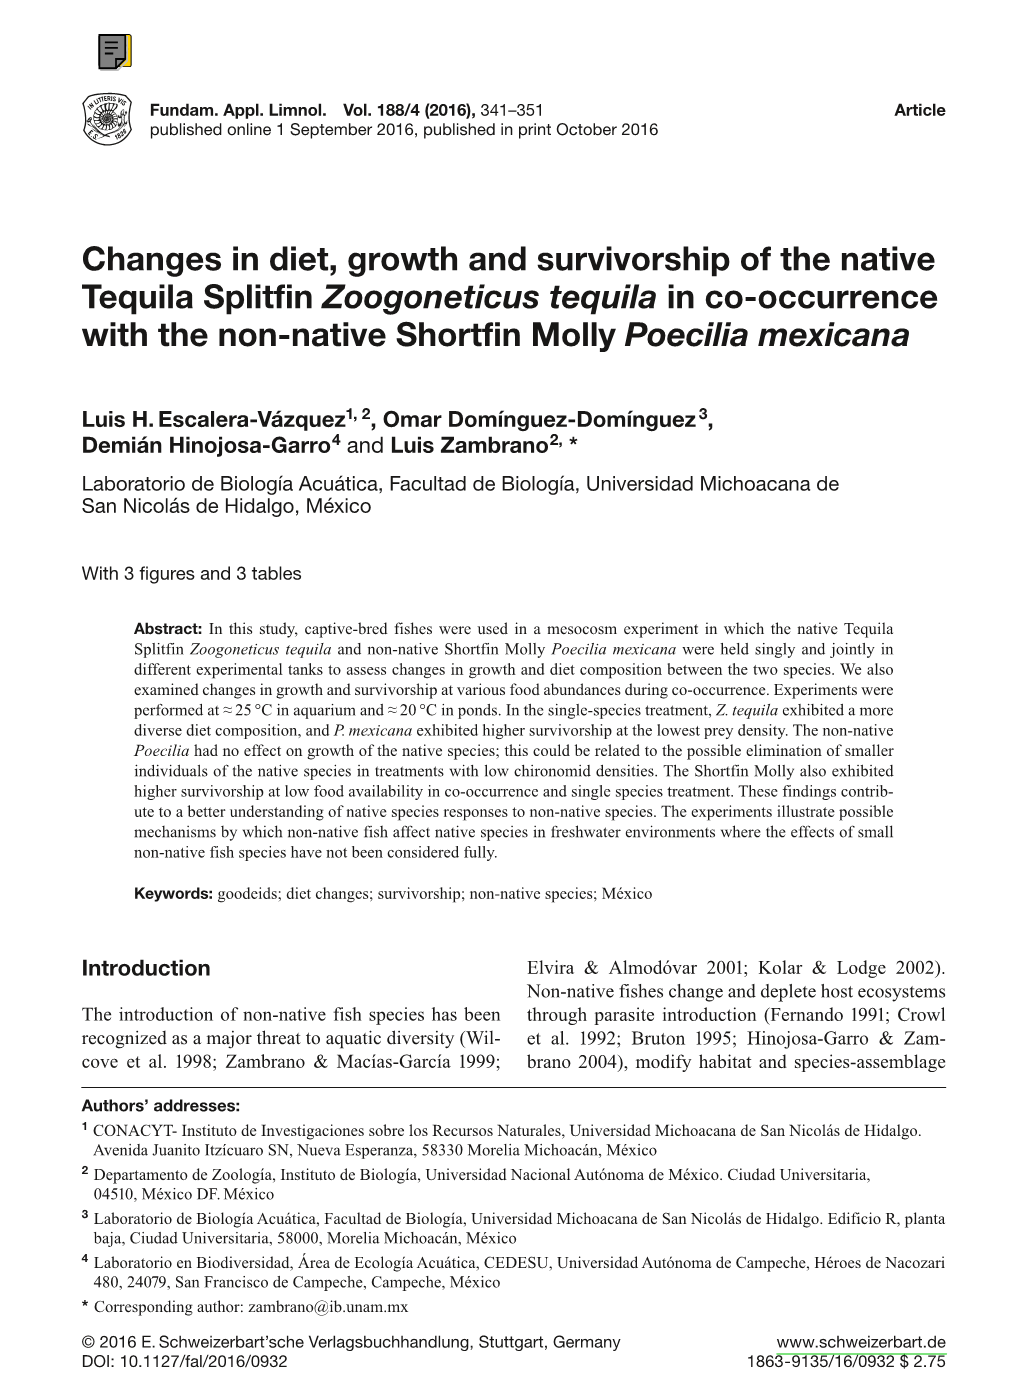 Changes in Diet, Growth and Survivorship of the Native Tequila Splitfin Zoogoneticus Tequila in Co-Occurrence with the Non-Native Shortfin Molly Poecilia Mexicana